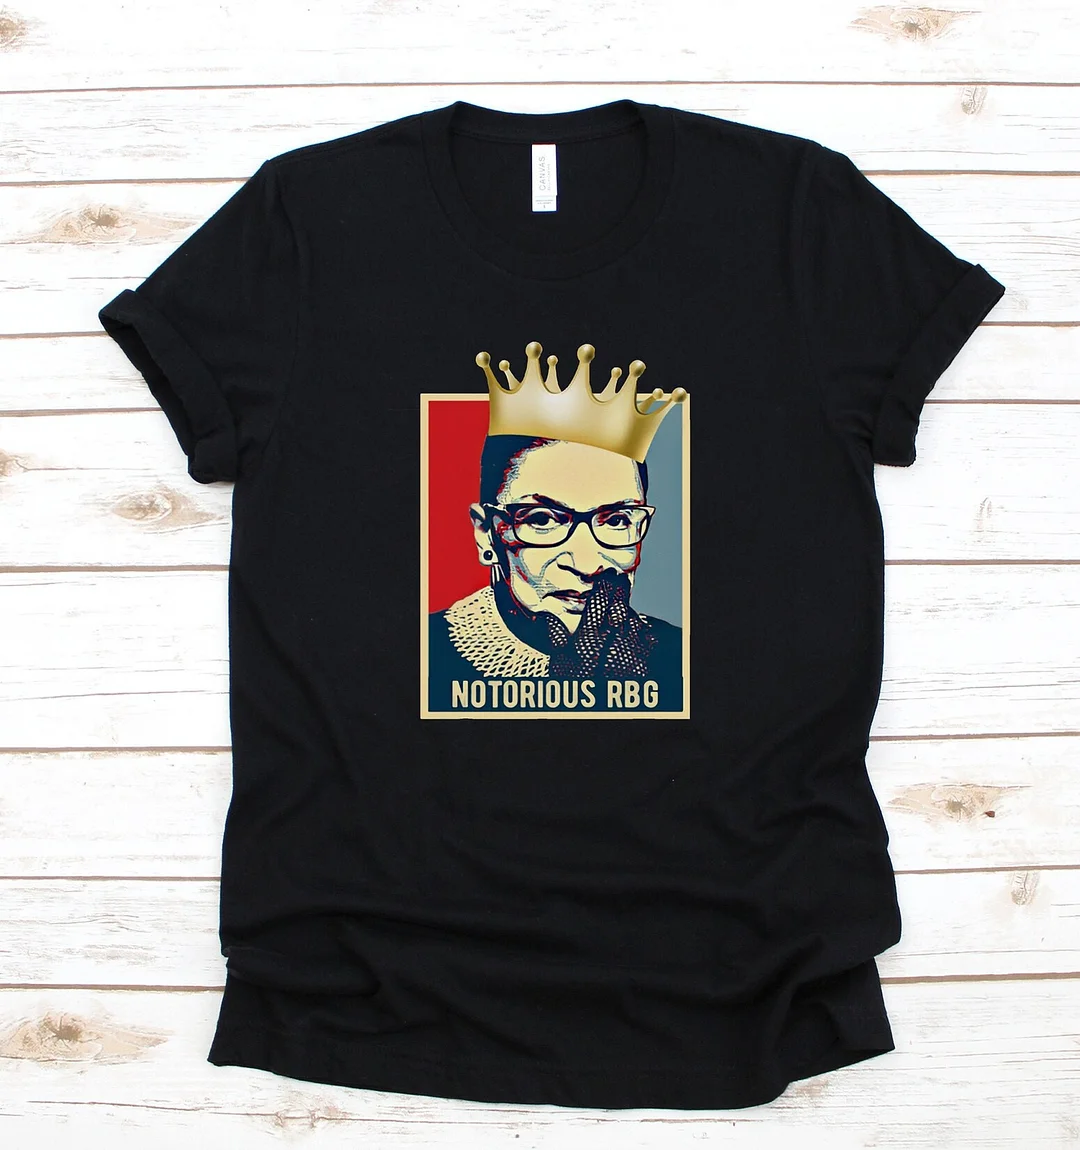 Women And Man Notorious Rbg Crown Shirt Feminist Ruth Bader Ginsburg I Dissent Top Tees